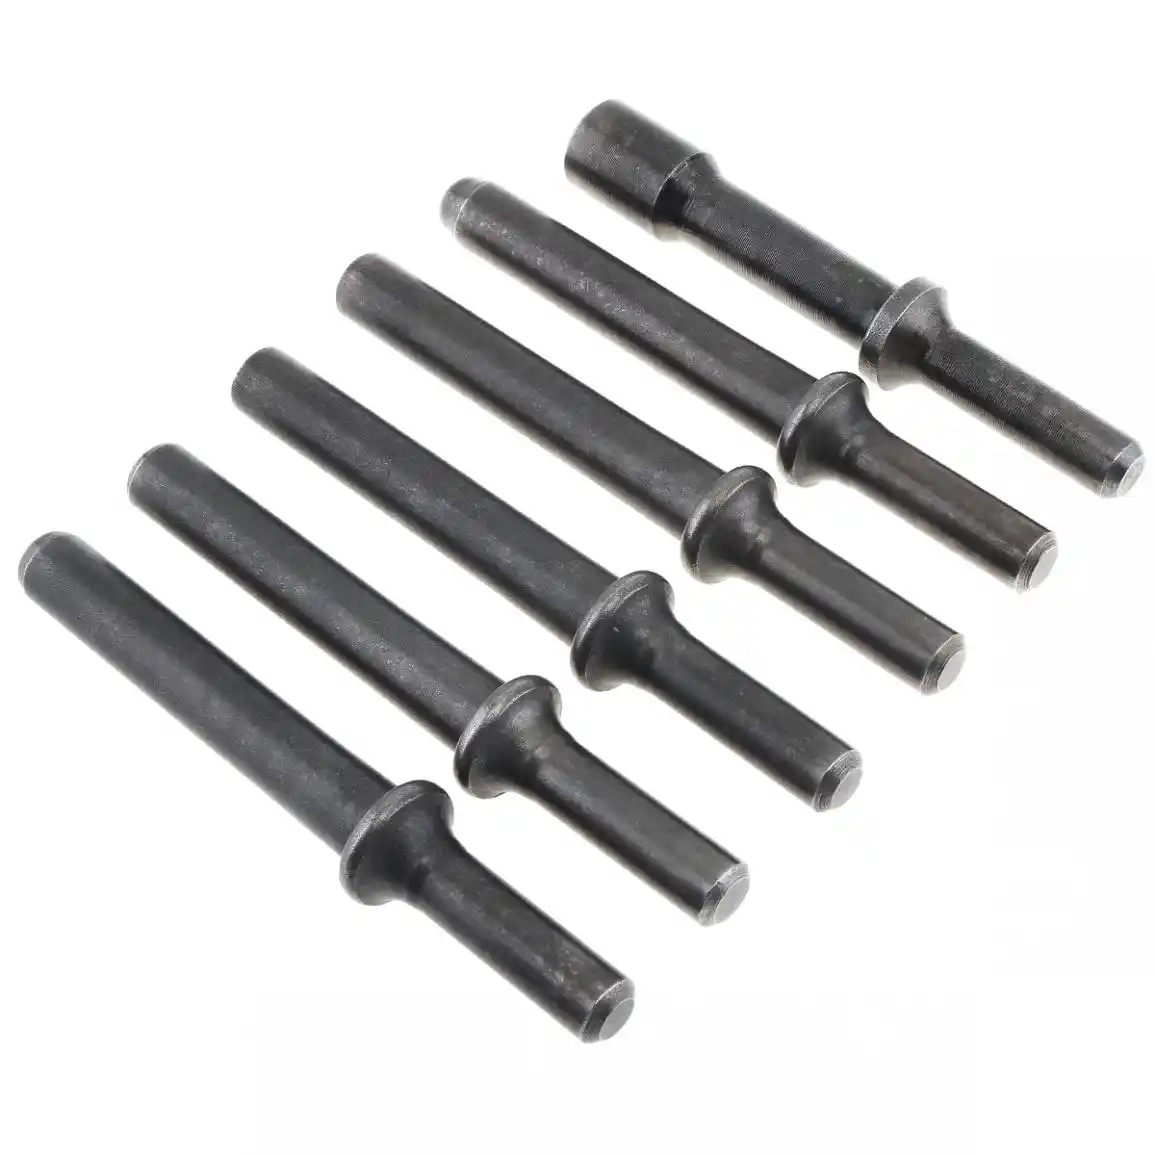 Details about  / 6pcs//set Hard 45# Steel Solid Air Rivet Impact Head Support Pneumatic Tool Gray